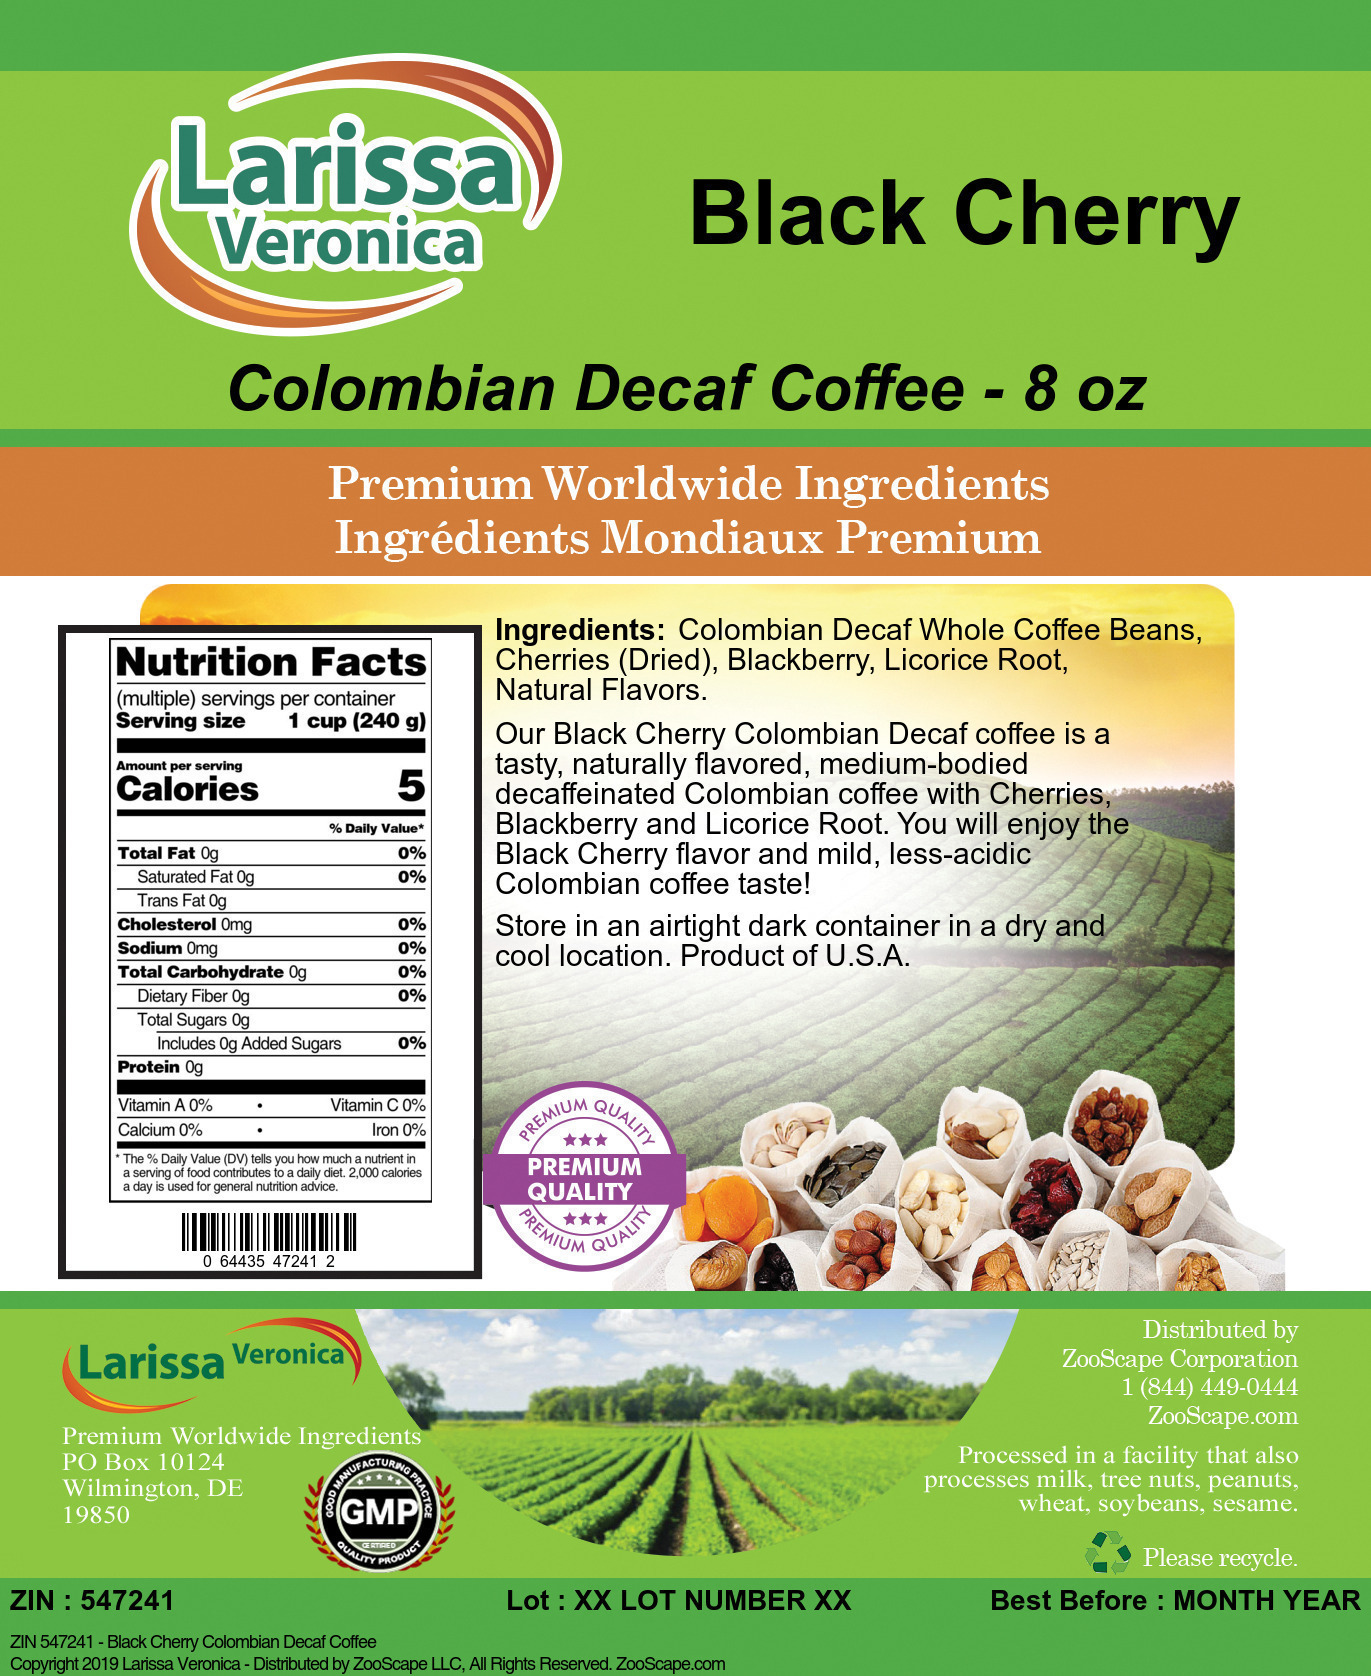 Black Cherry Colombian Decaf Coffee - Label